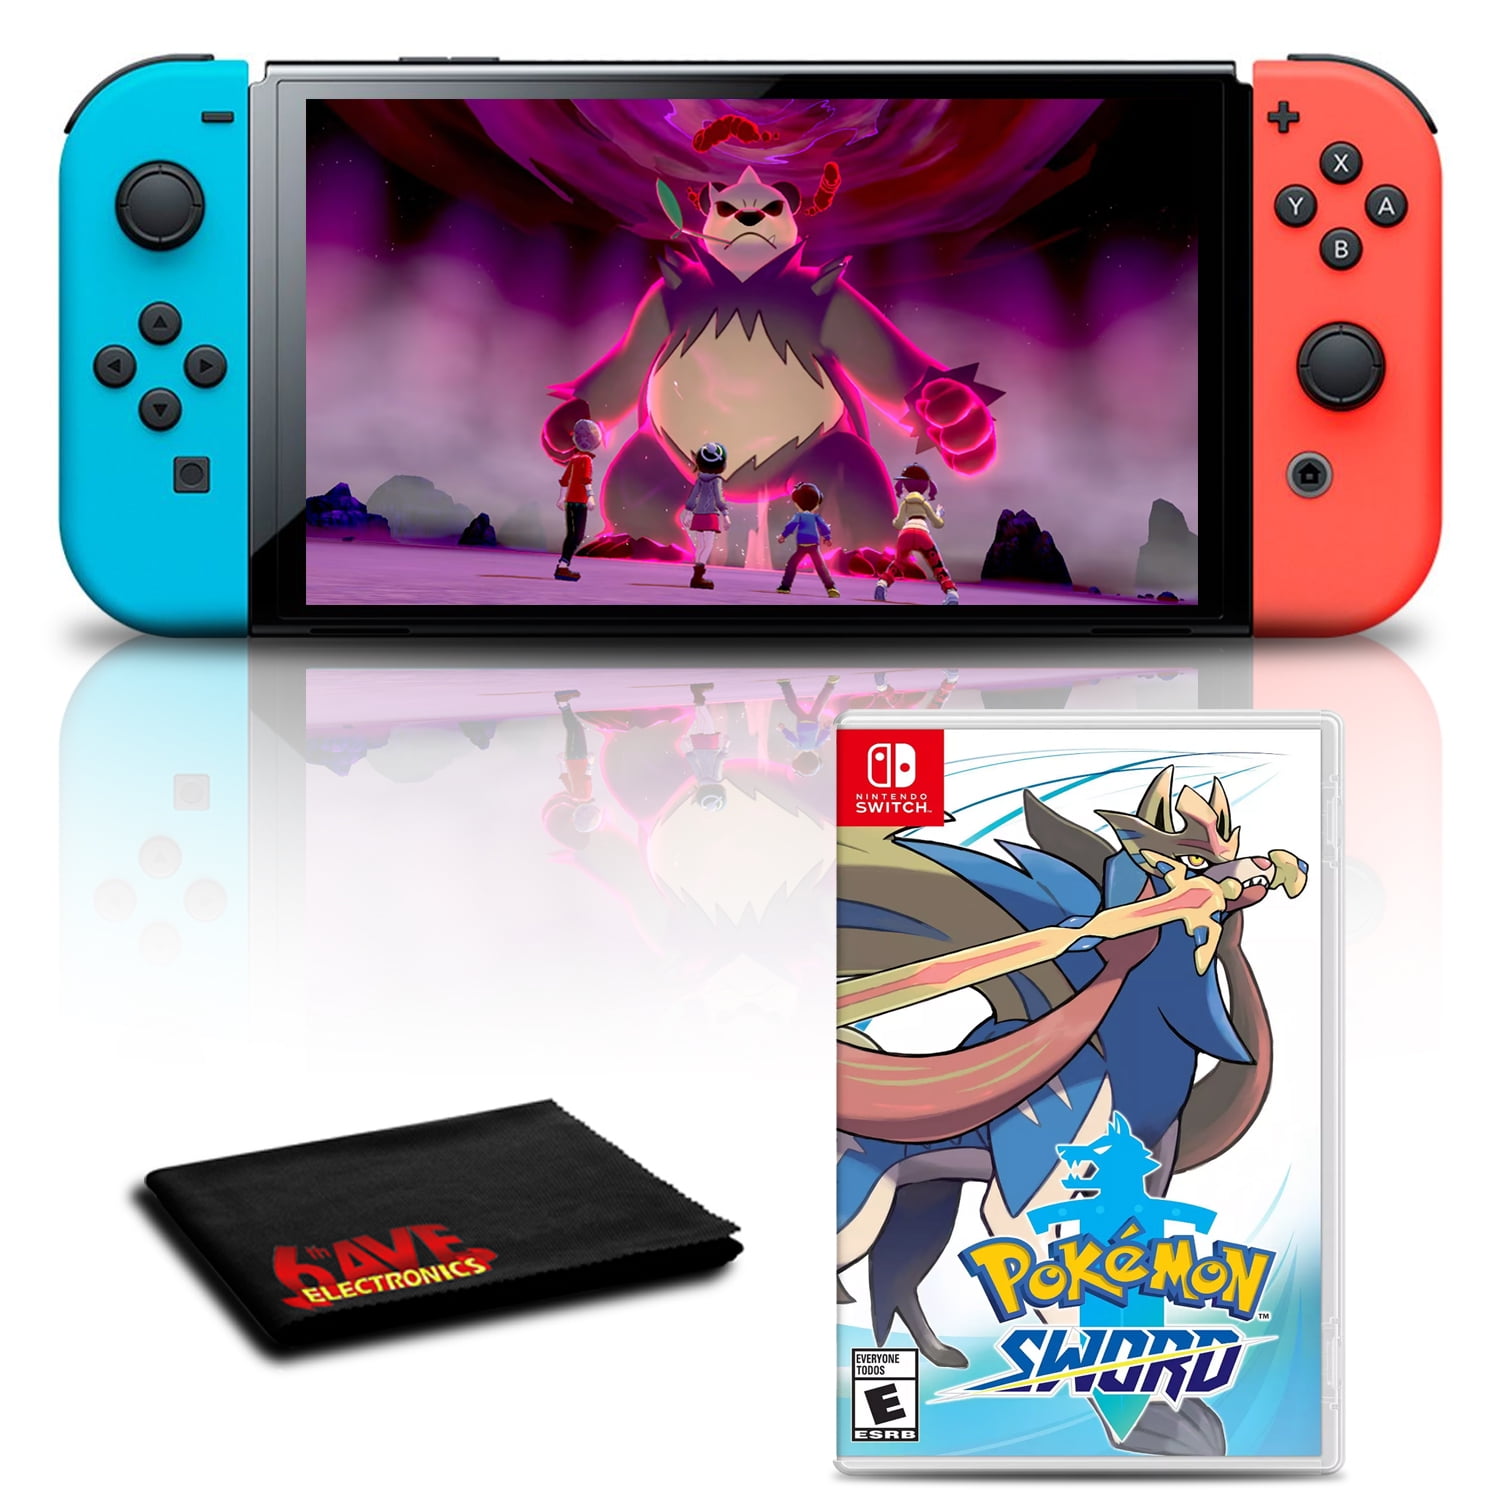 Nintendo Switch OLED Neon Blue/Red with Pokemon Sword Game | Walmart Canada